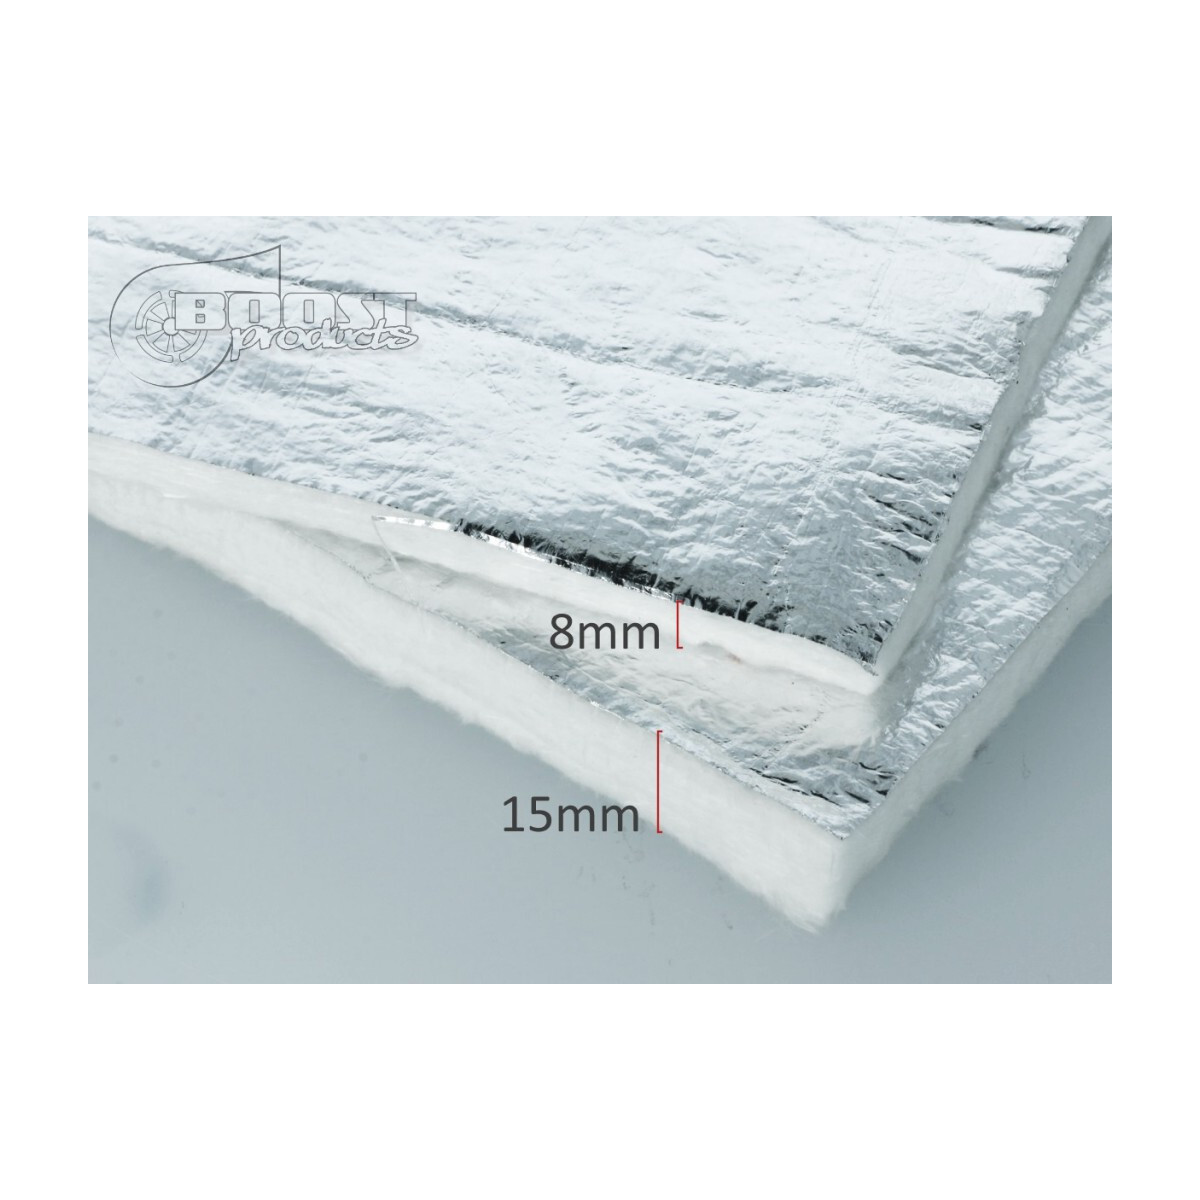 BOOST products Heat Protection - Fiberglass Mat with Aluminum coating 15mm -60x90cm